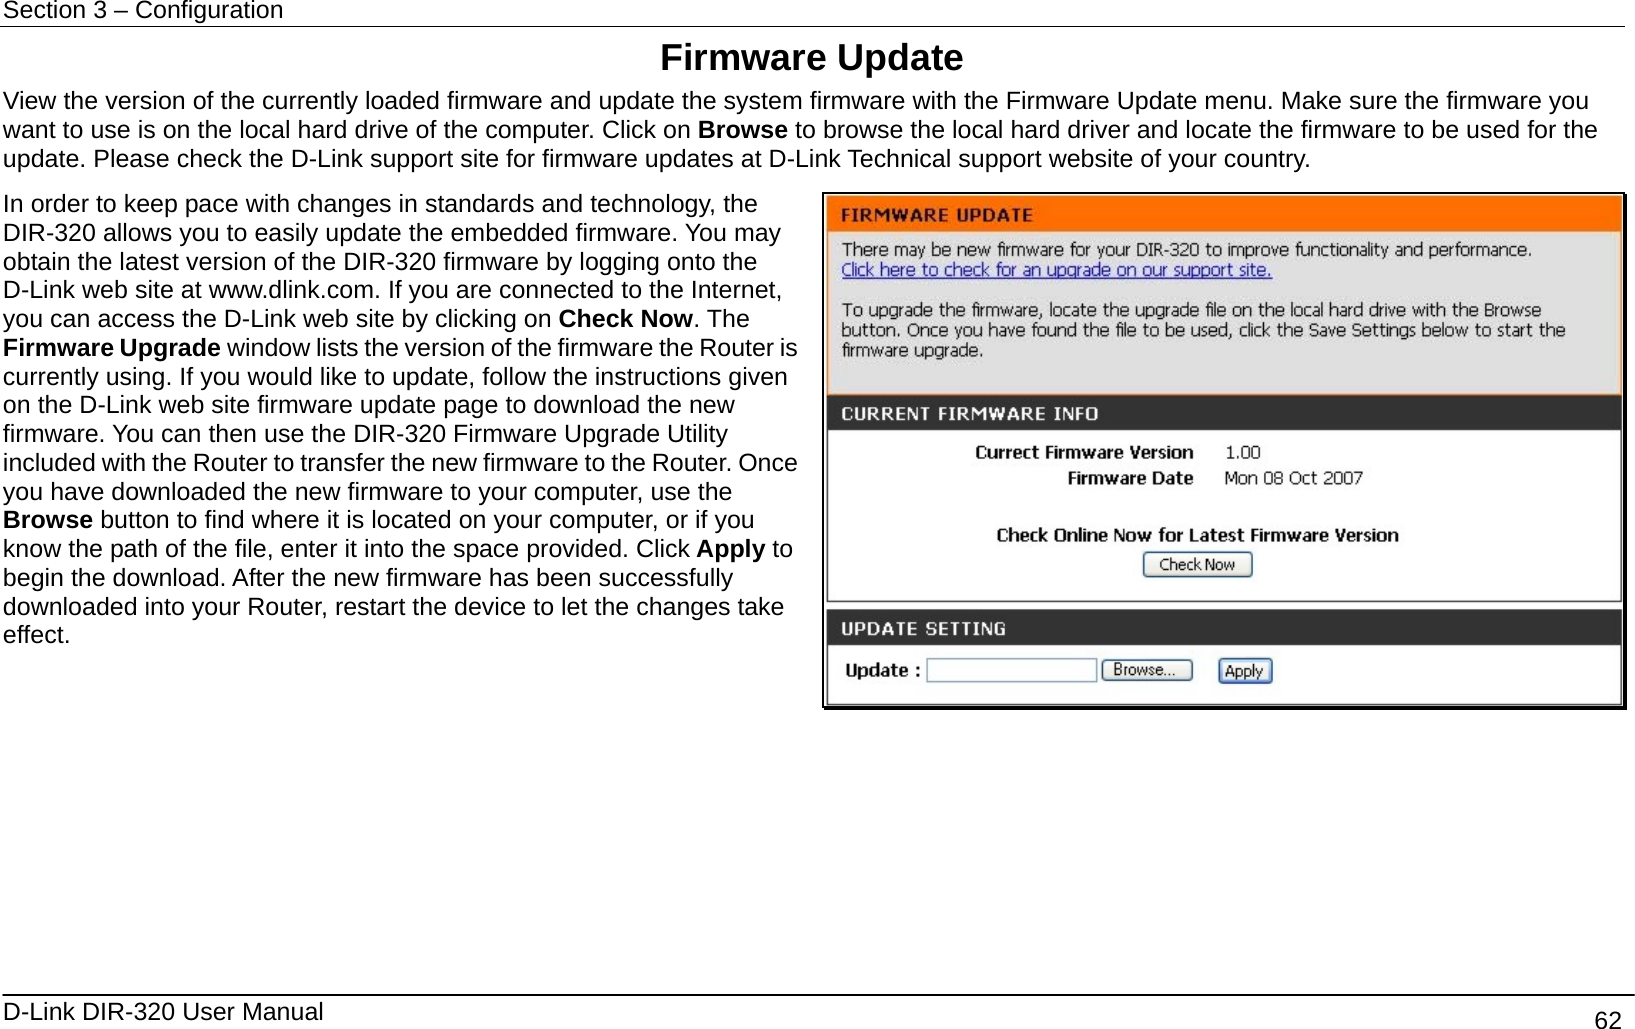 Section 3 – Configuration   D-Link DIR-320 User Manual                                       62 Firmware Update View the version of the currently loaded firmware and update the system firmware with the Firmware Update menu. Make sure the firmware you want to use is on the local hard drive of the computer. Click on Browse to browse the local hard driver and locate the firmware to be used for the update. Please check the D-Link support site for firmware updates at D-Link Technical support website of your country. In order to keep pace with changes in standards and technology, the DIR-320 allows you to easily update the embedded firmware. You may obtain the latest version of the DIR-320 firmware by logging onto the D-Link web site at www.dlink.com. If you are connected to the Internet, you can access the D-Link web site by clicking on Check Now. The Firmware Upgrade window lists the version of the firmware the Router is currently using. If you would like to update, follow the instructions given on the D-Link web site firmware update page to download the new firmware. You can then use the DIR-320 Firmware Upgrade Utility included with the Router to transfer the new firmware to the Router. Once you have downloaded the new firmware to your computer, use the Browse button to find where it is located on your computer, or if you know the path of the file, enter it into the space provided. Click Apply to begin the download. After the new firmware has been successfully downloaded into your Router, restart the device to let the changes take effect.        